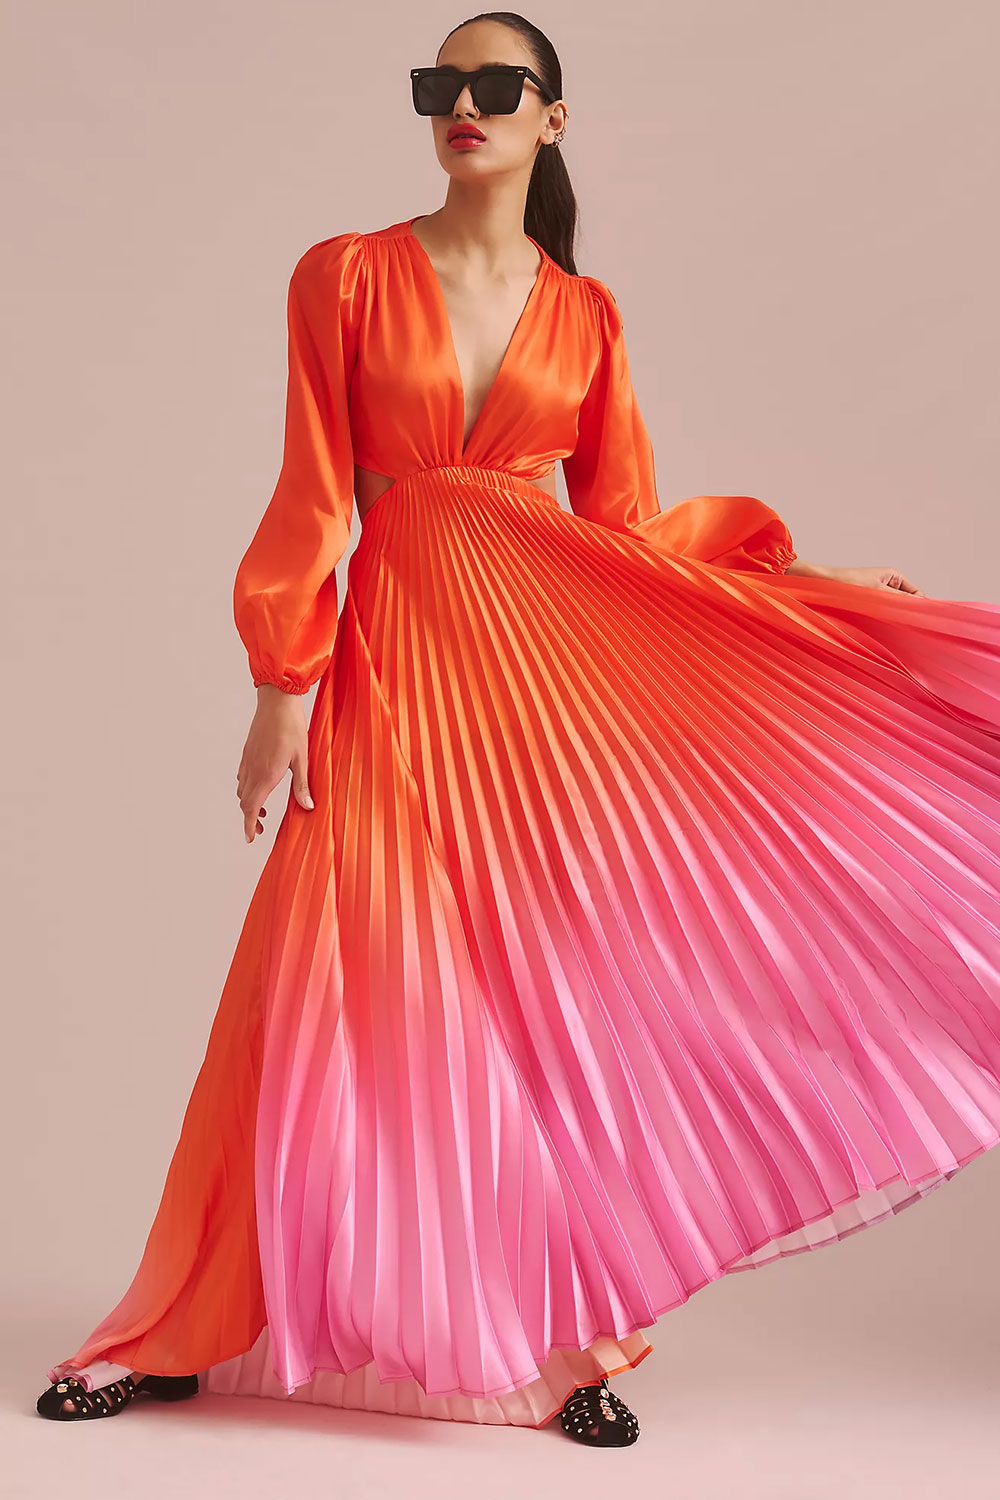 Ombre Anthro wedding guest dress